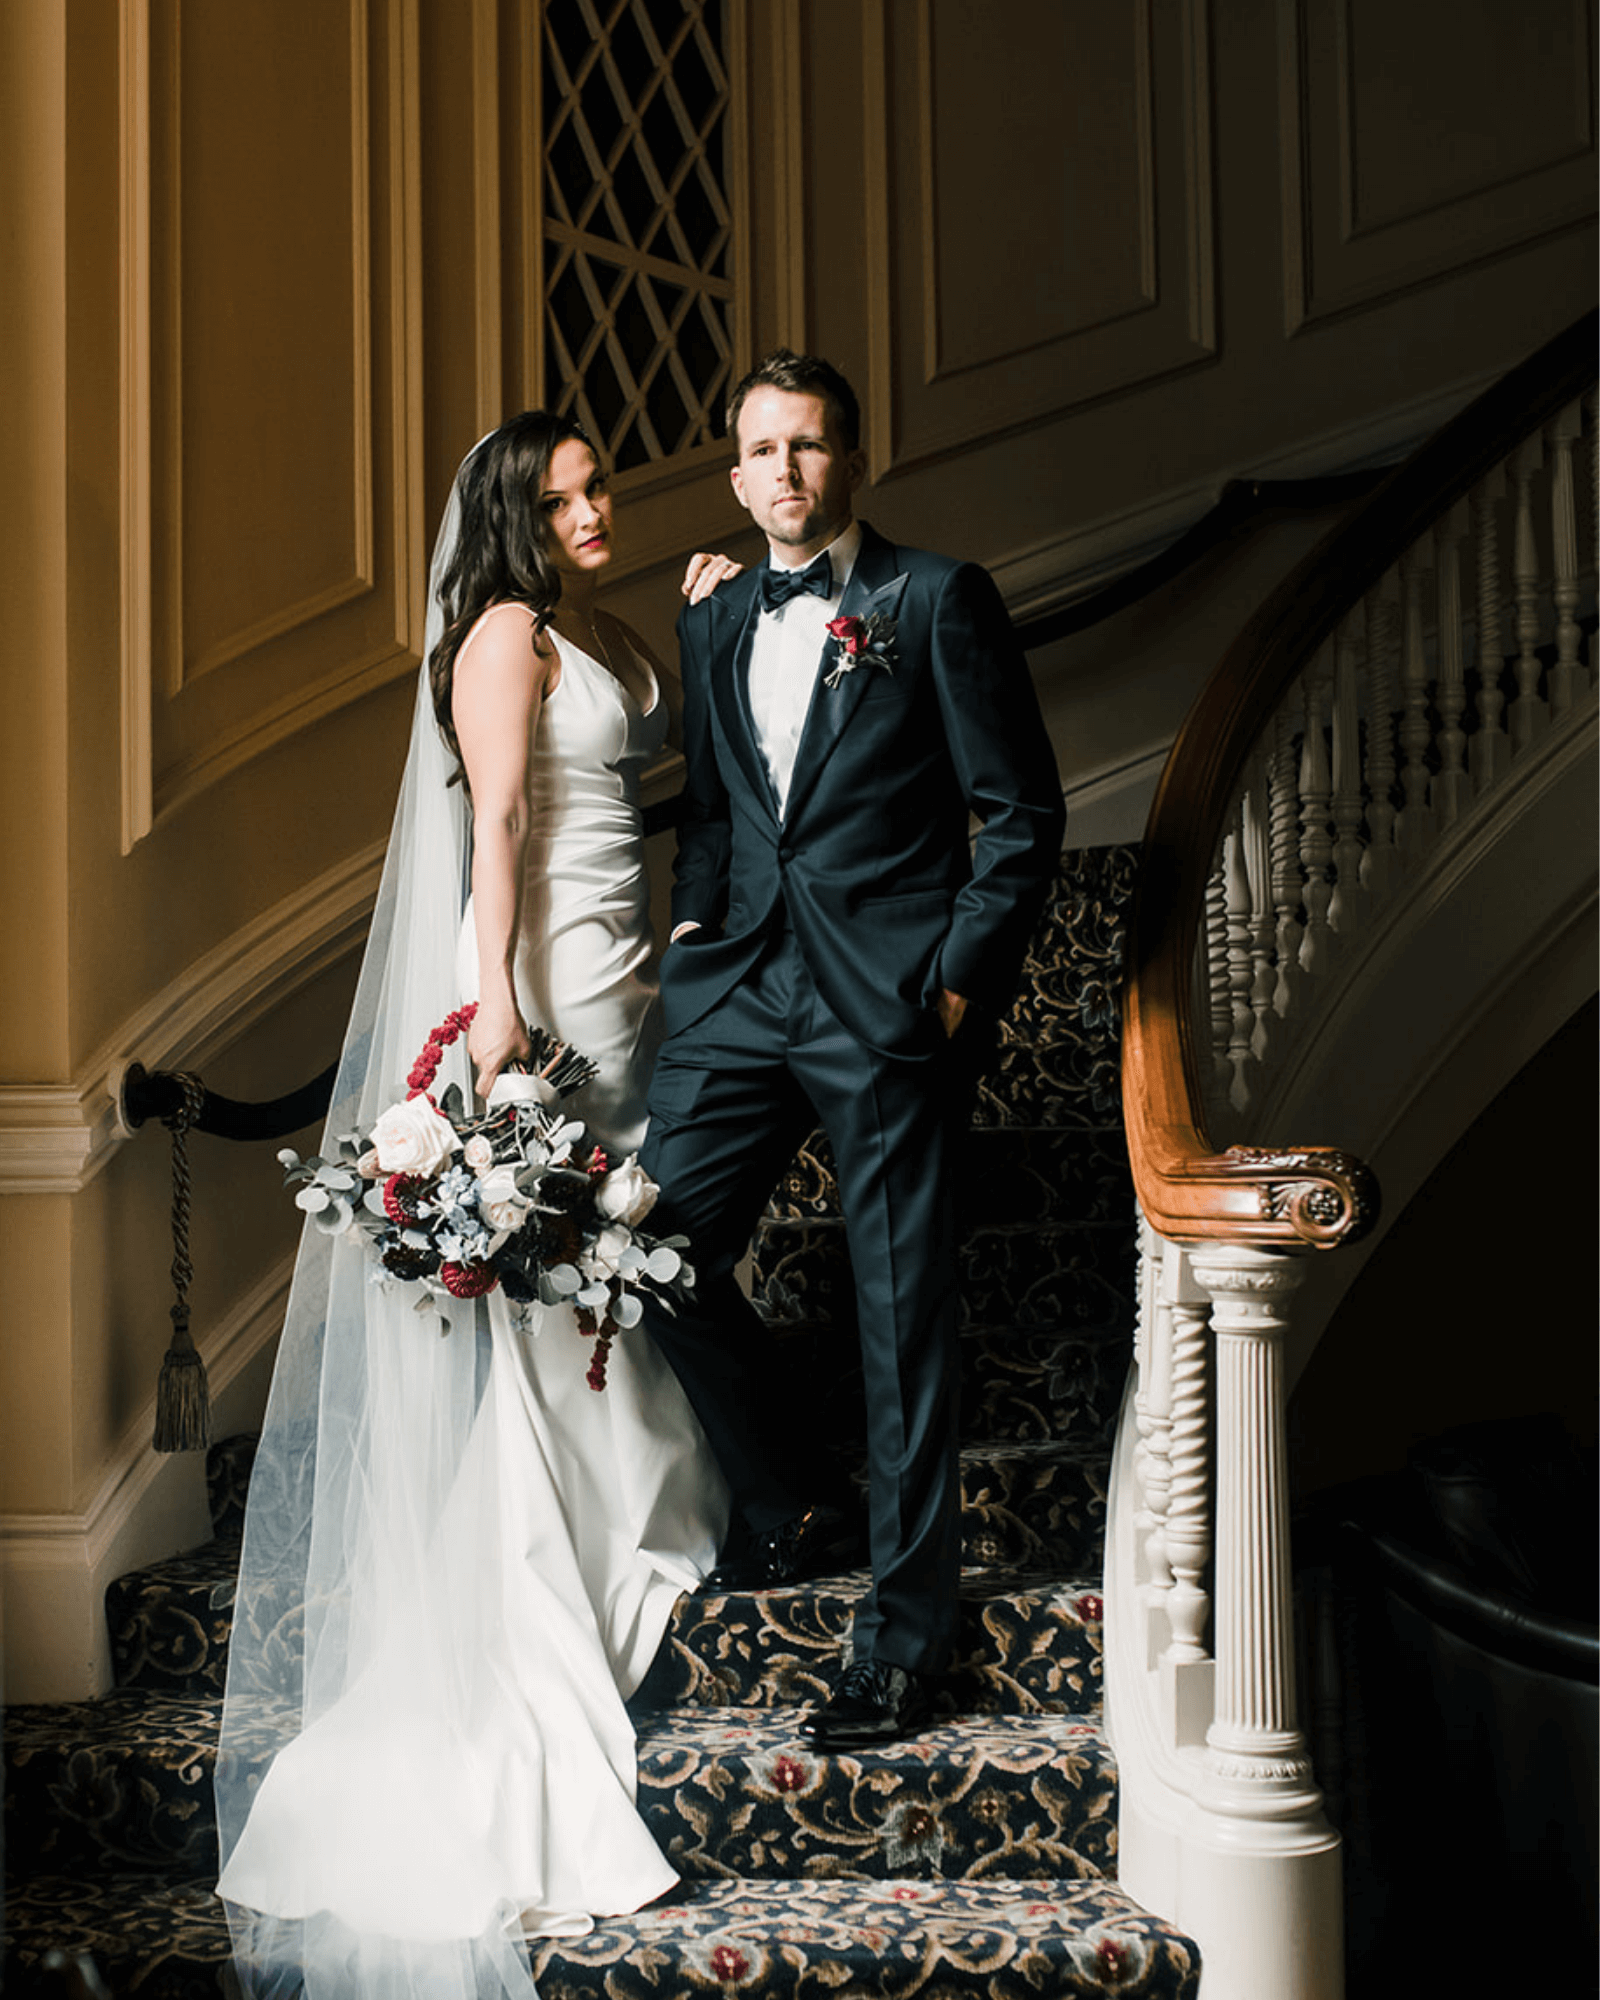 Bride Lauren with Husband on staircase. Husband in dark suite with hands in pockets. Lauren in white gown with veil behind her